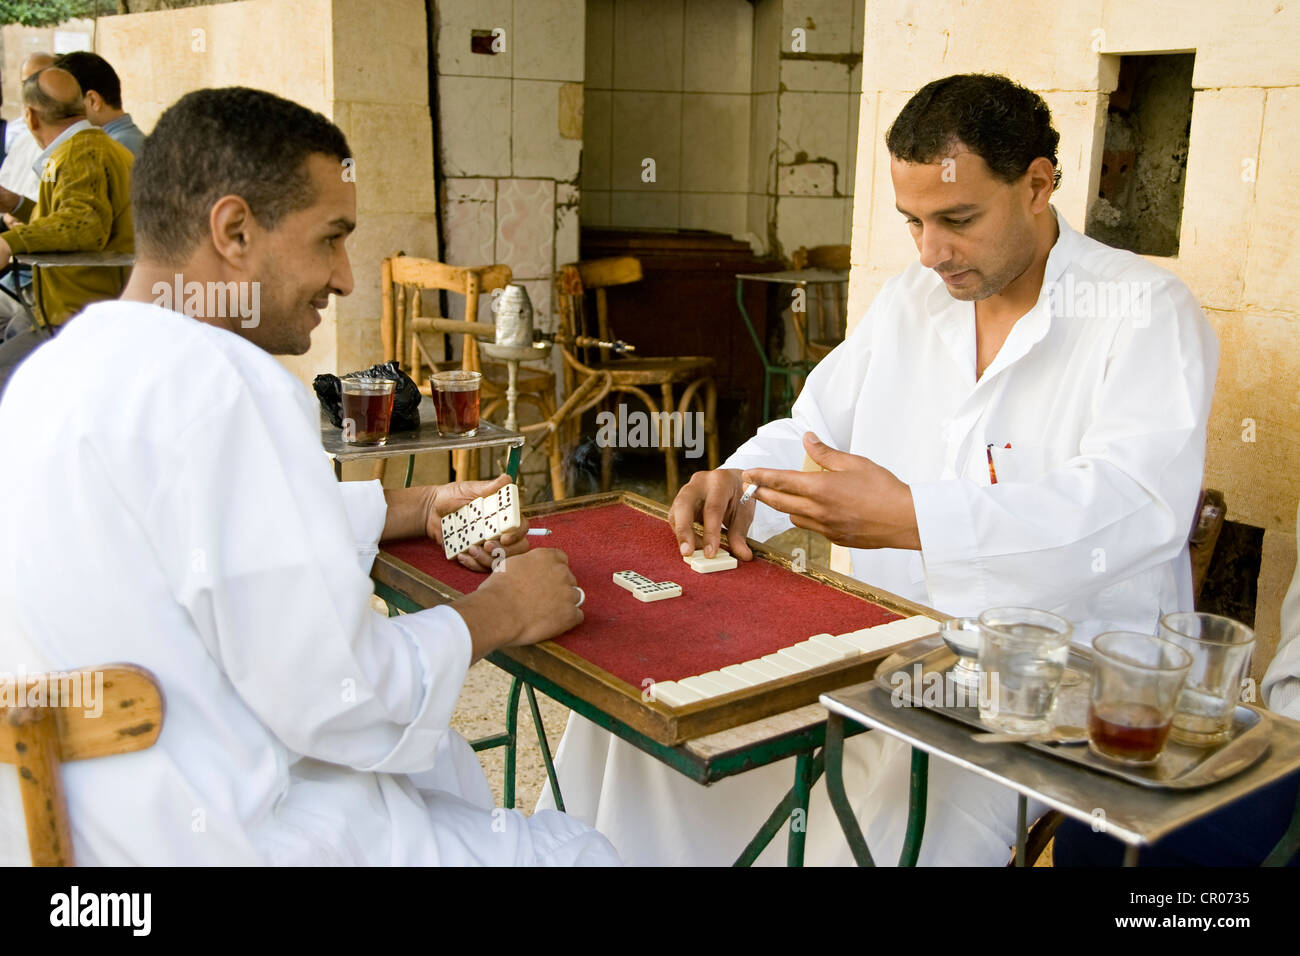 Egypt, Cairo, playing dominos at cafe Stock Photo